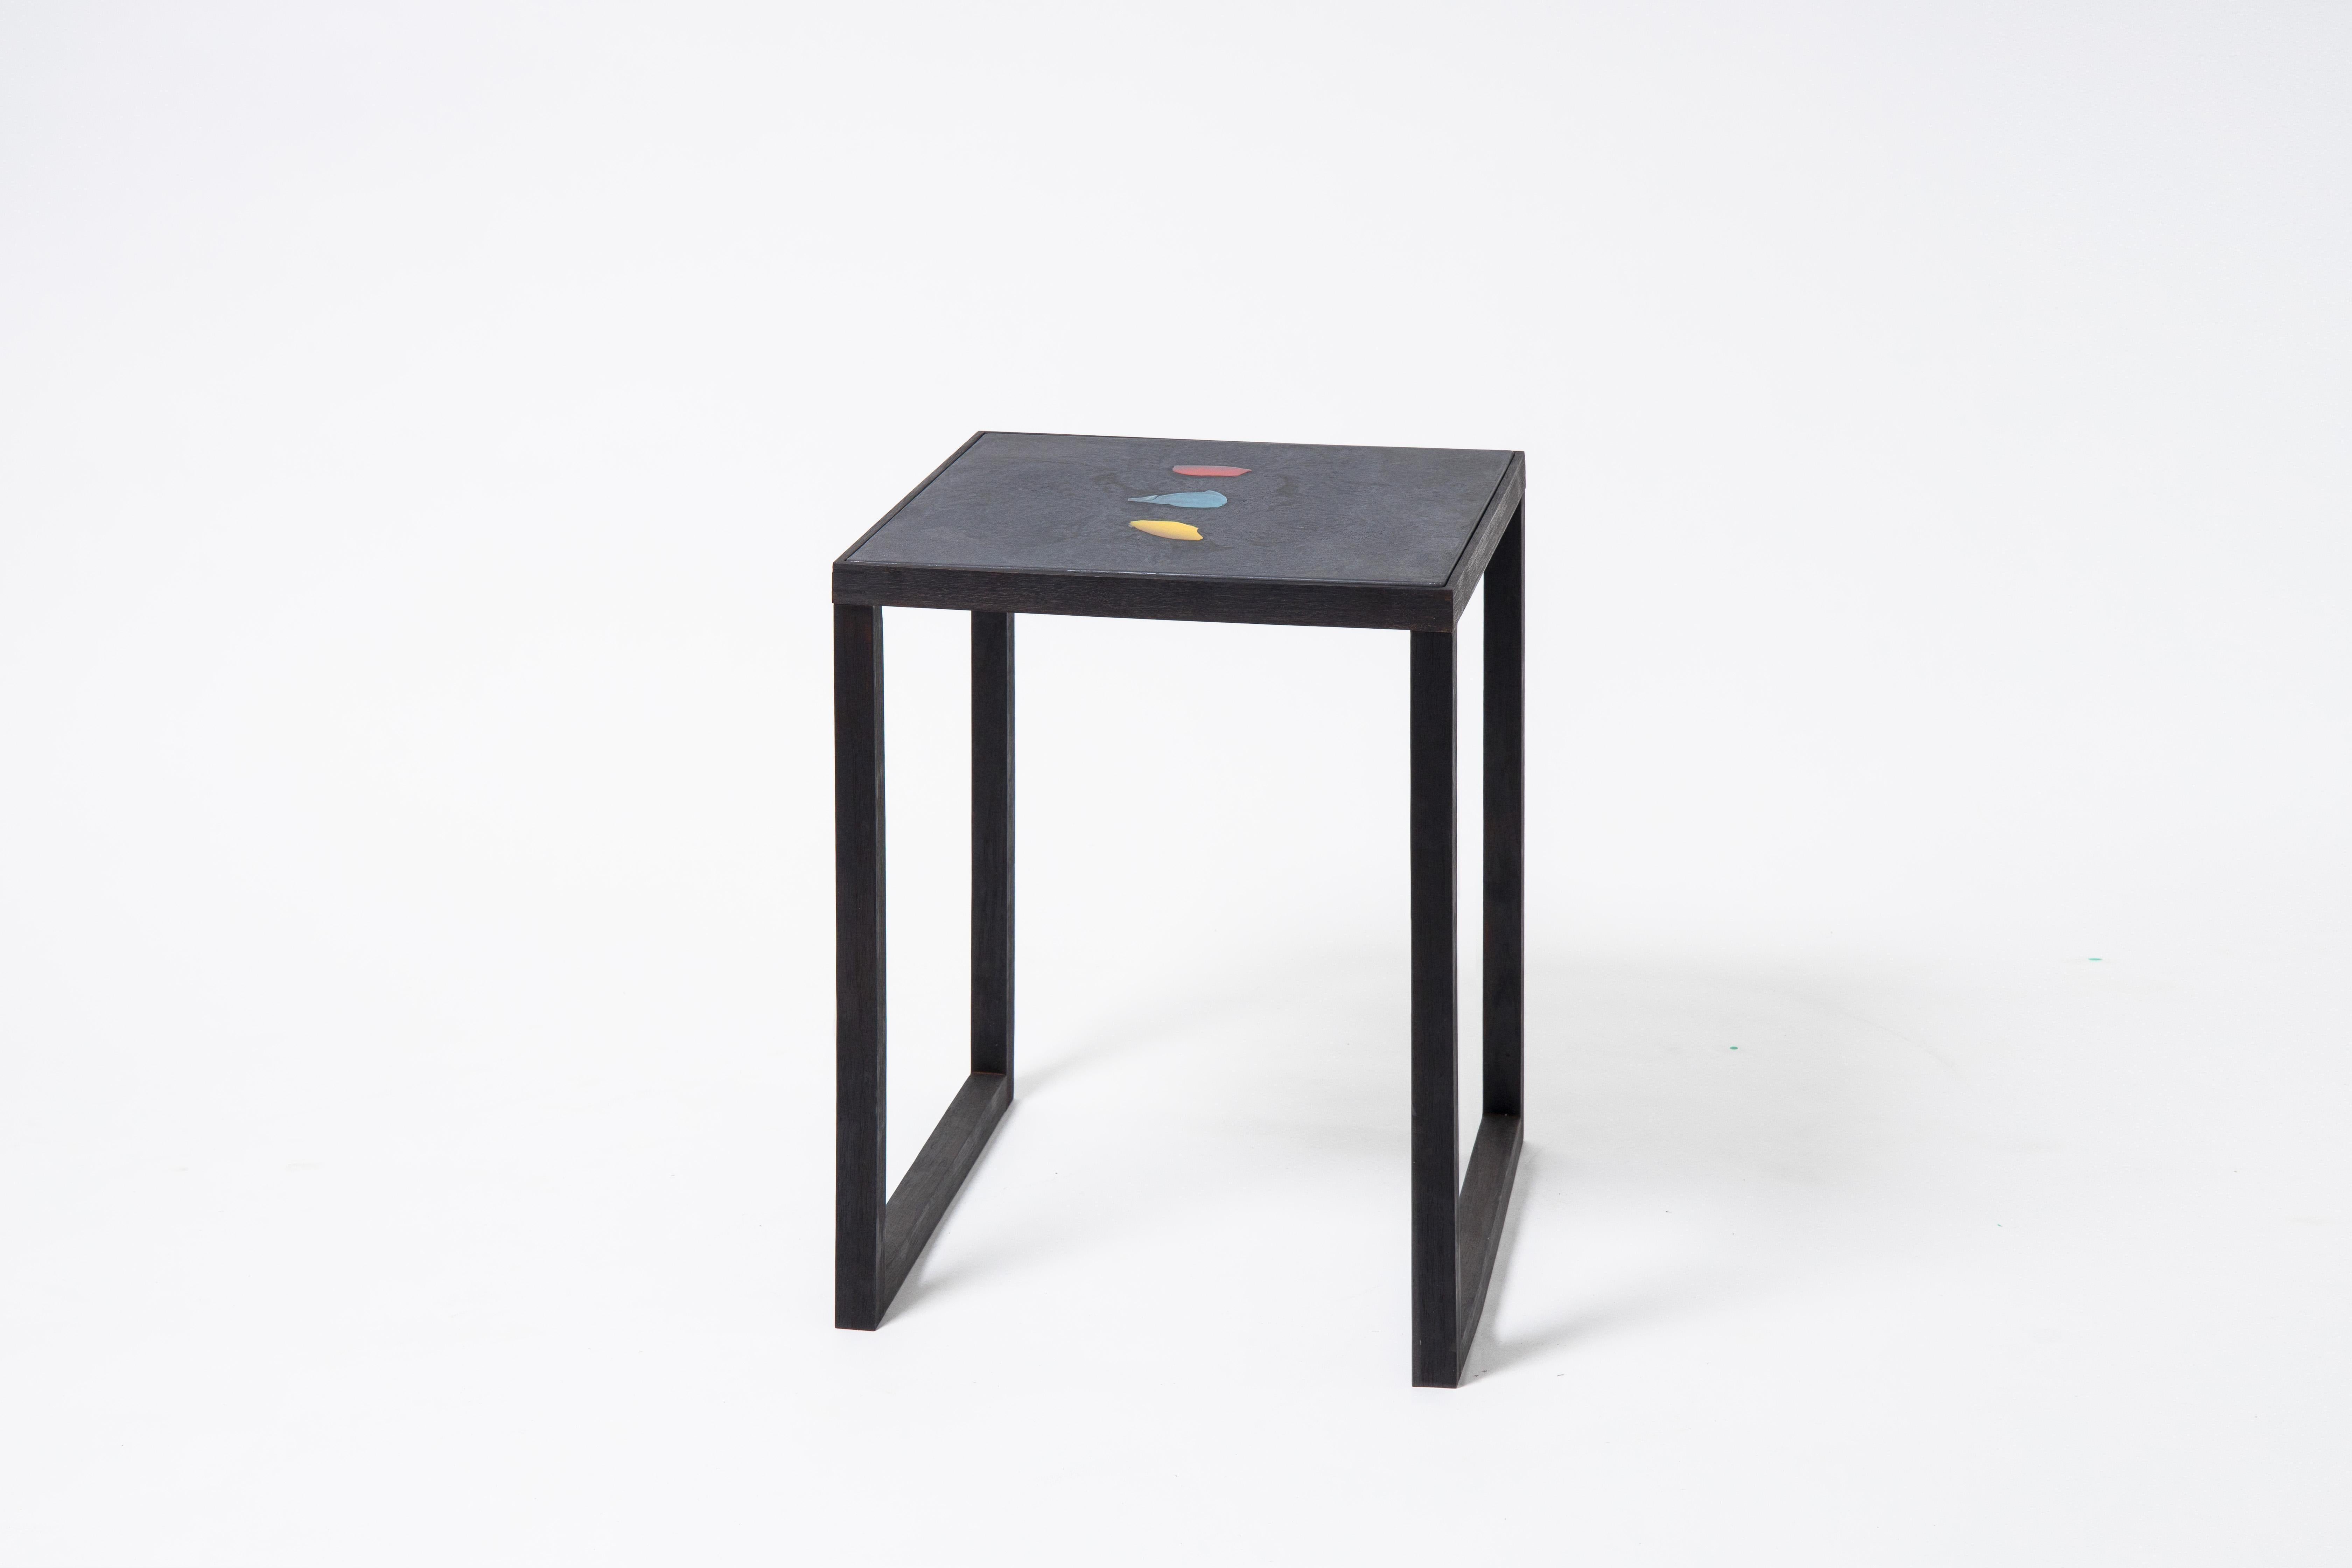 Basis Rho side table by Studio Jeschkelanger
Dimensions: 50 x 50 x 65 cm
Materials: Unique Basis Rho tabletop: lluminated glass, colored concrete
 Oiled Steel frame, handcrafted

Basis Rho was developed by Studio Jeschkelanger. It is understood